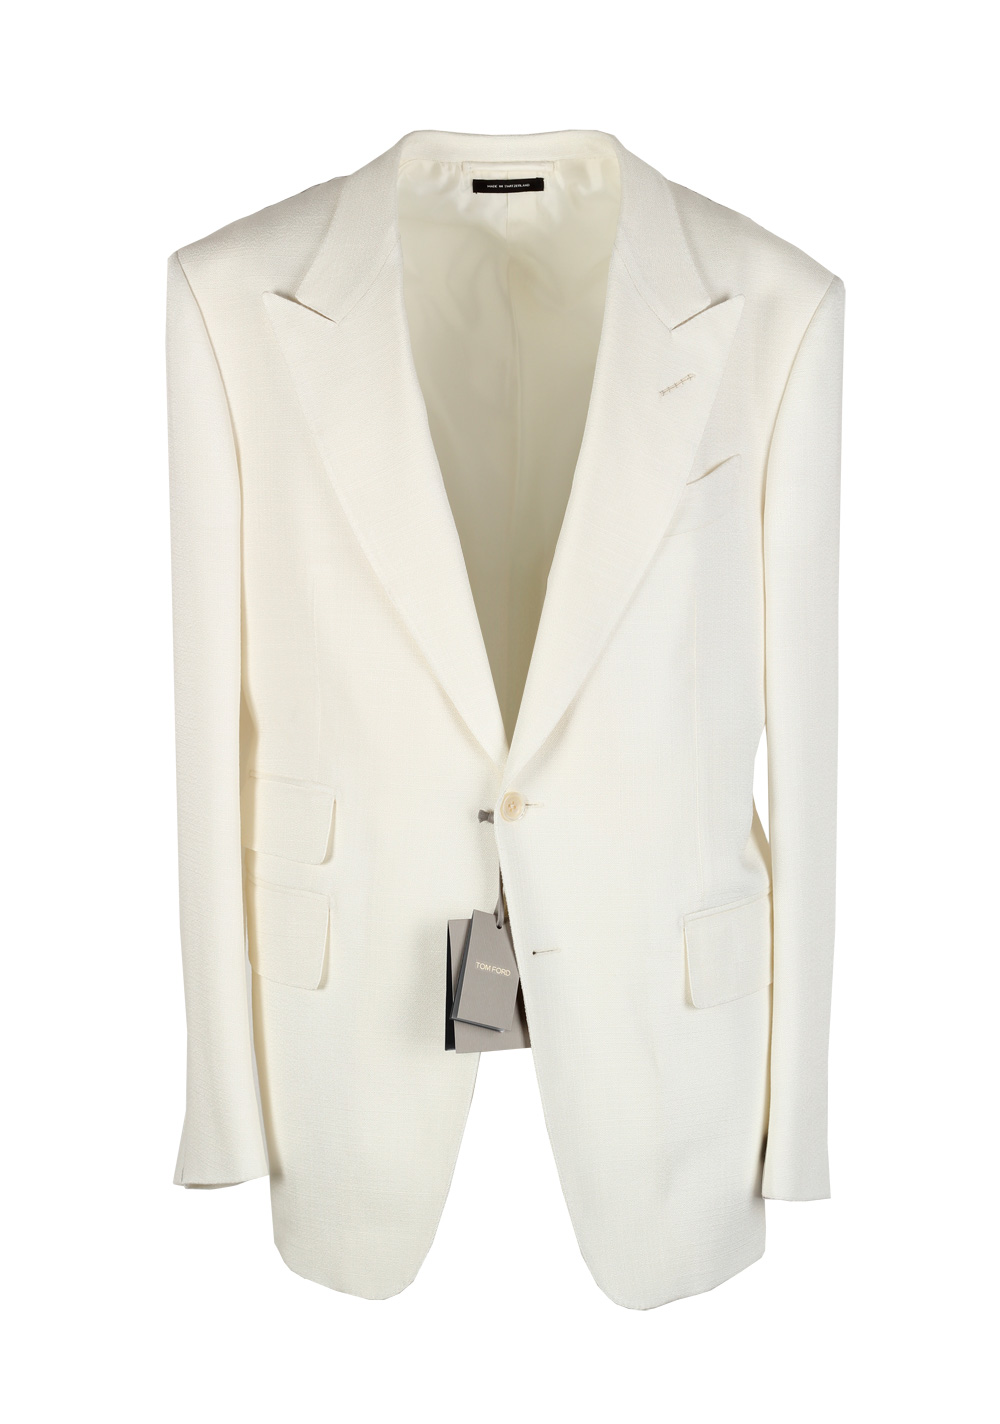 TOM FORD Shelton Off White Sport Coat Size 54 / 44R U.S. Rayon Silk Lining | Costume Limité